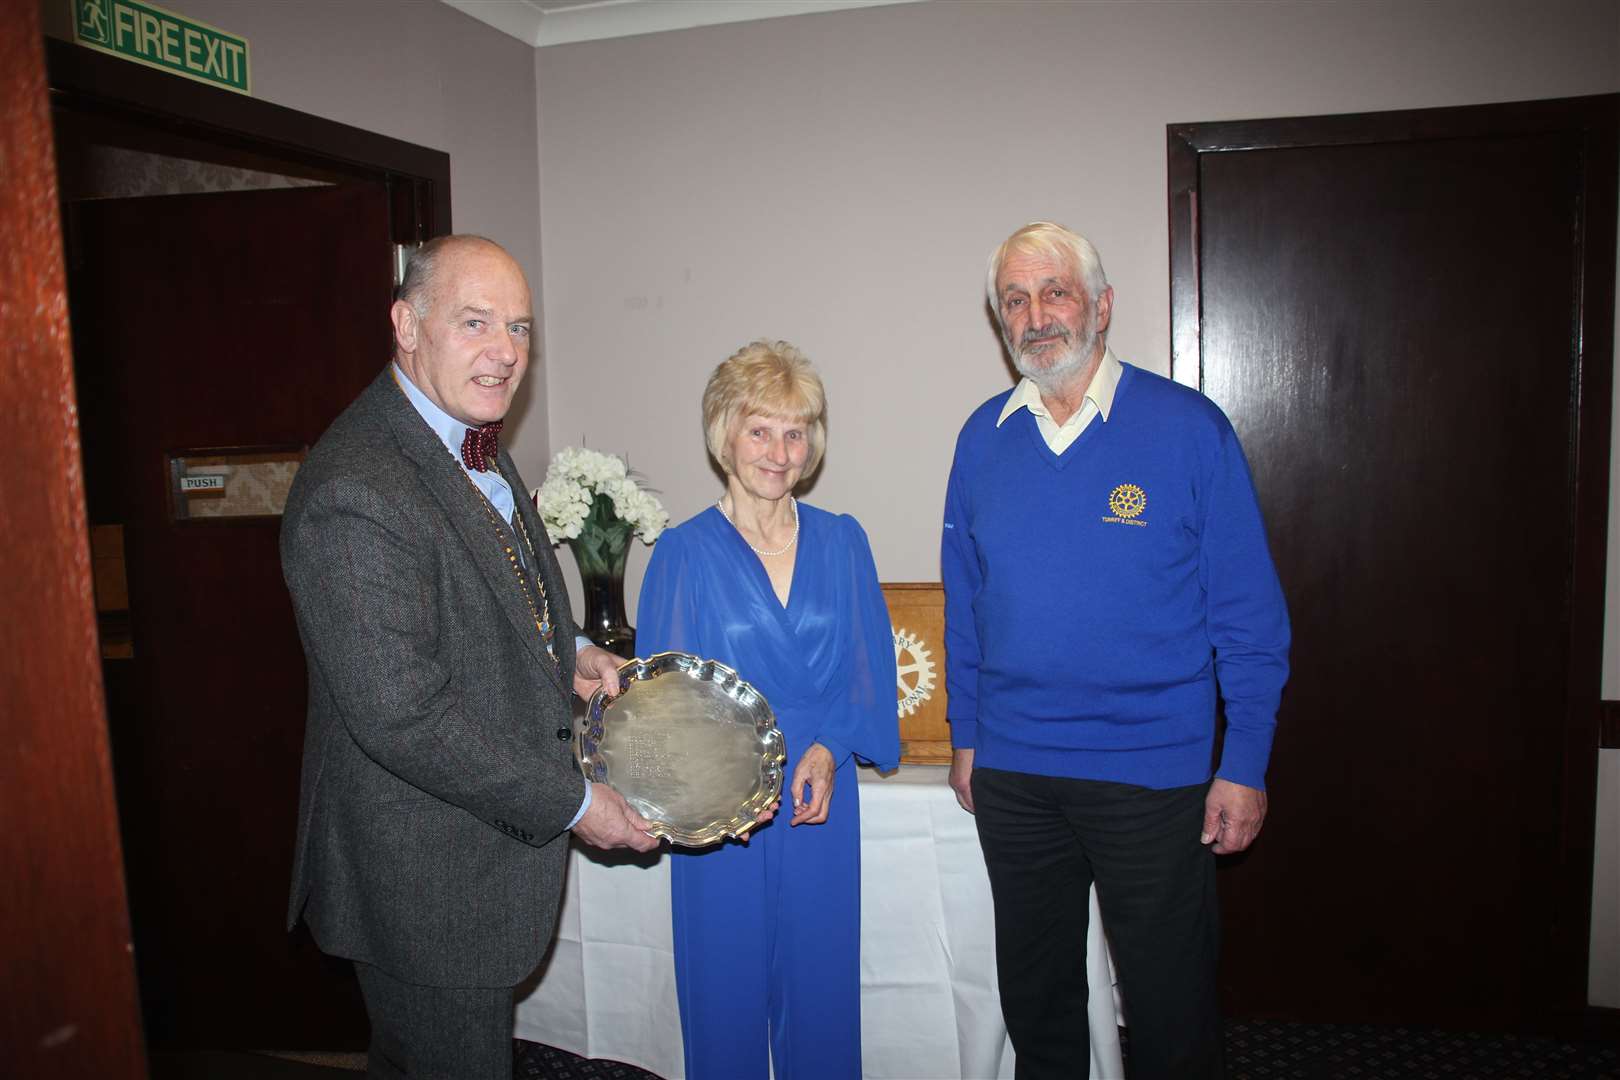 Turriff Citizen Of The Year Pearl Hendry receives her accolade from Rotary president Olin Thores and rotarian Robert Pirie. Picture: Kirsty Brown